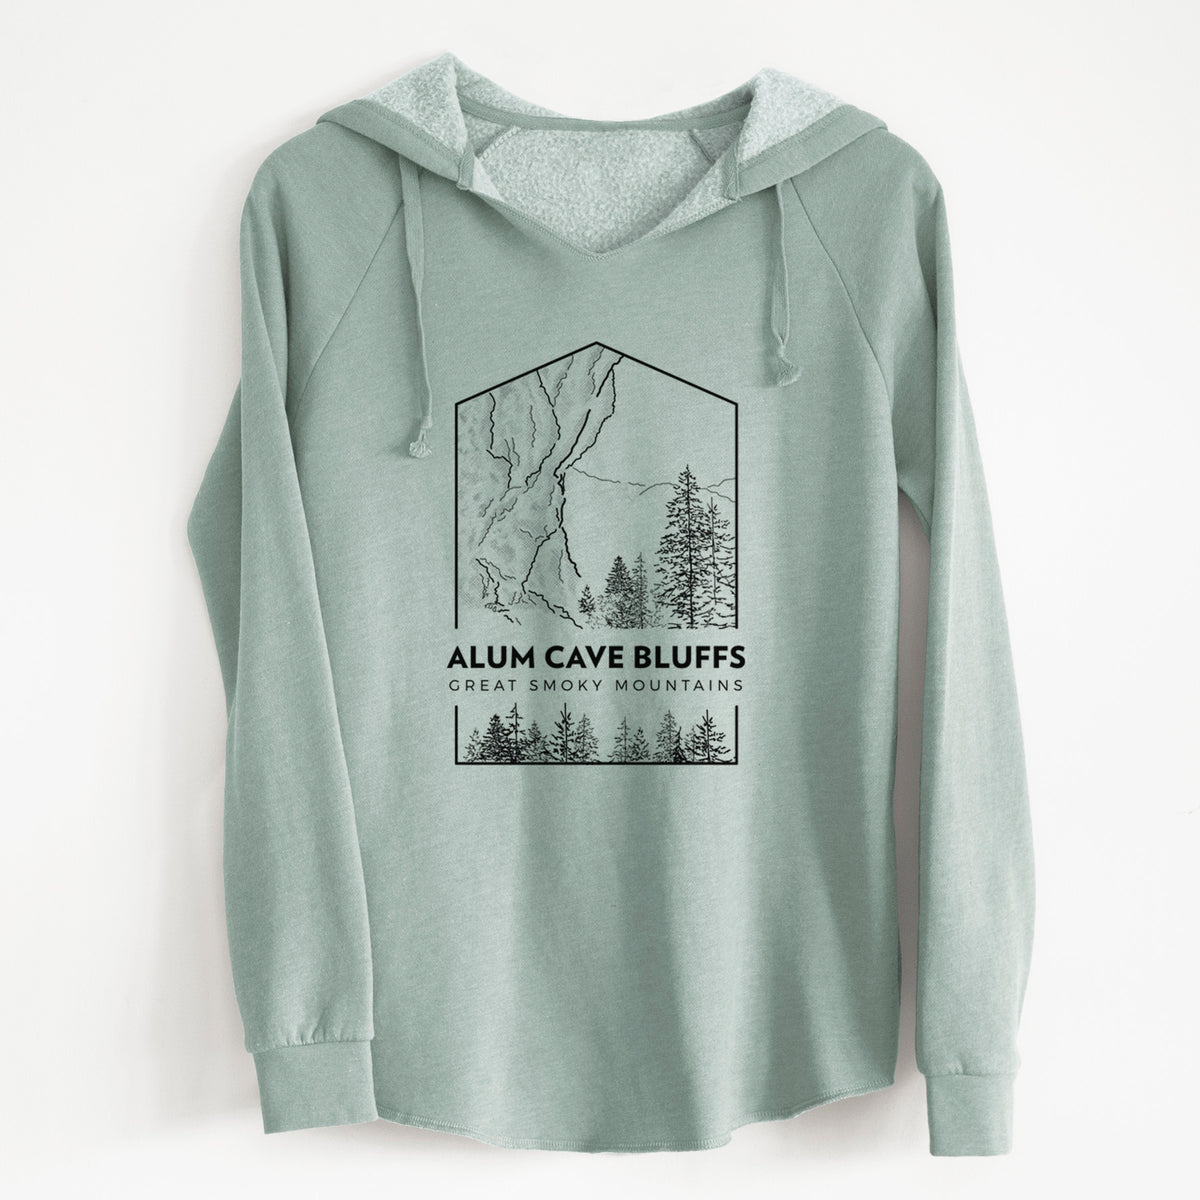 Alum Cave Bluffs - Great Smoky Mountains National Park - Cali Wave Hooded Sweatshirt